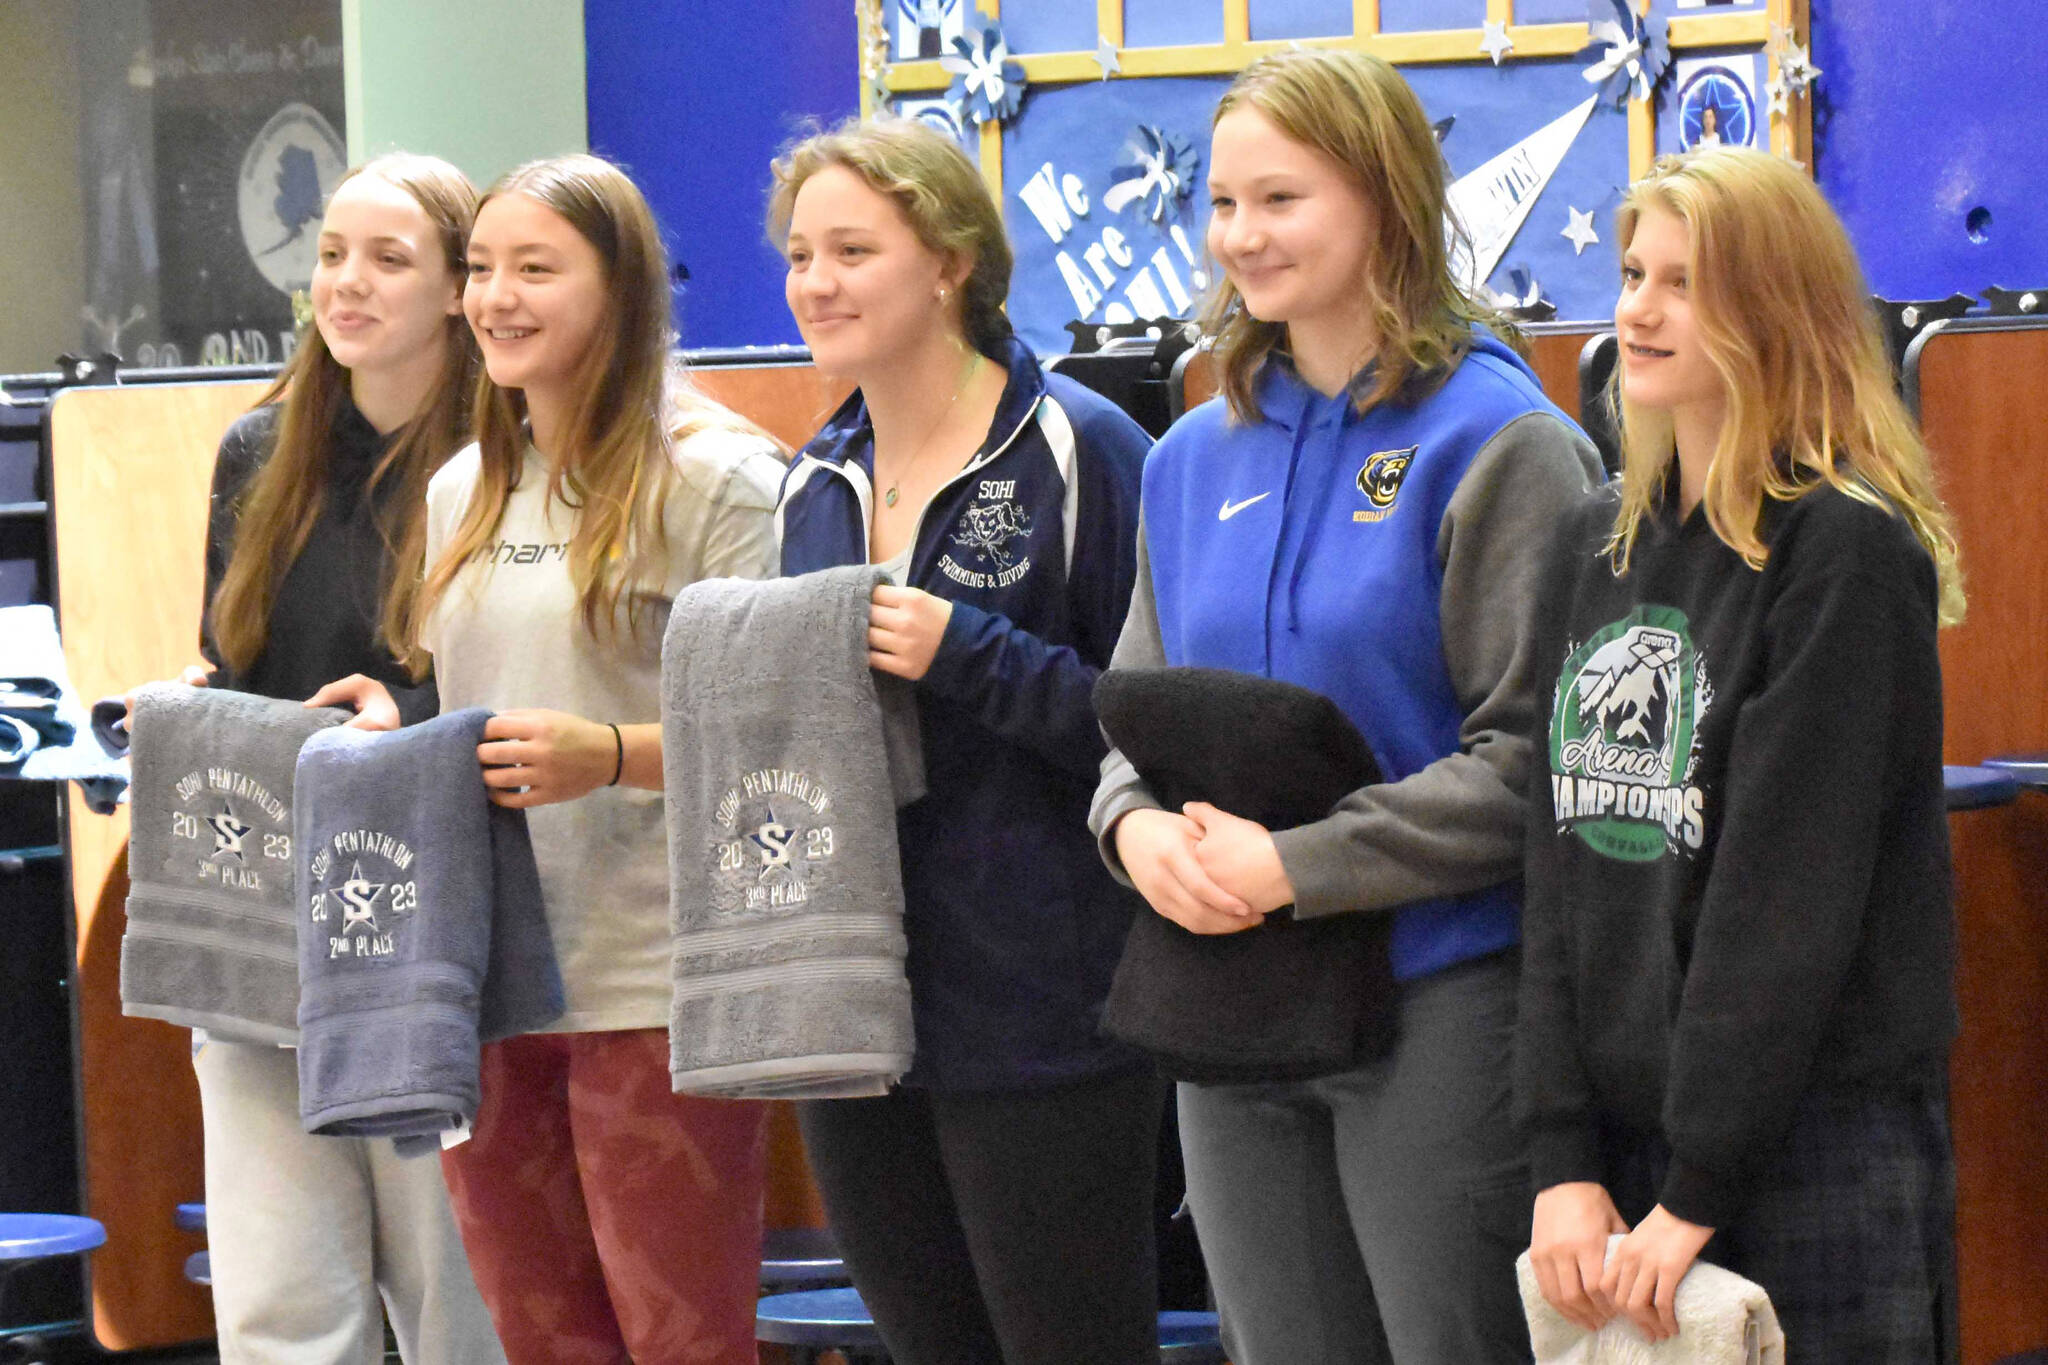 The top five girls finishers in the SoHi Pentathlon pose with their trophy towels Friday, Sept. 15, 2023, at Soldotna High School in Soldotna, Alaska. From left to right are first-place finisher Amaya Rocheleau of Kodiak, Colony’s Jasmine Anderson in second, Soldotna’s Charisma Watkins in third, Kodiak’s Morgan Hagen in fifth and Colony’s Hannah Cooper in fourth. (Photo by Jeff Helminiak/Peninsula Clarion)